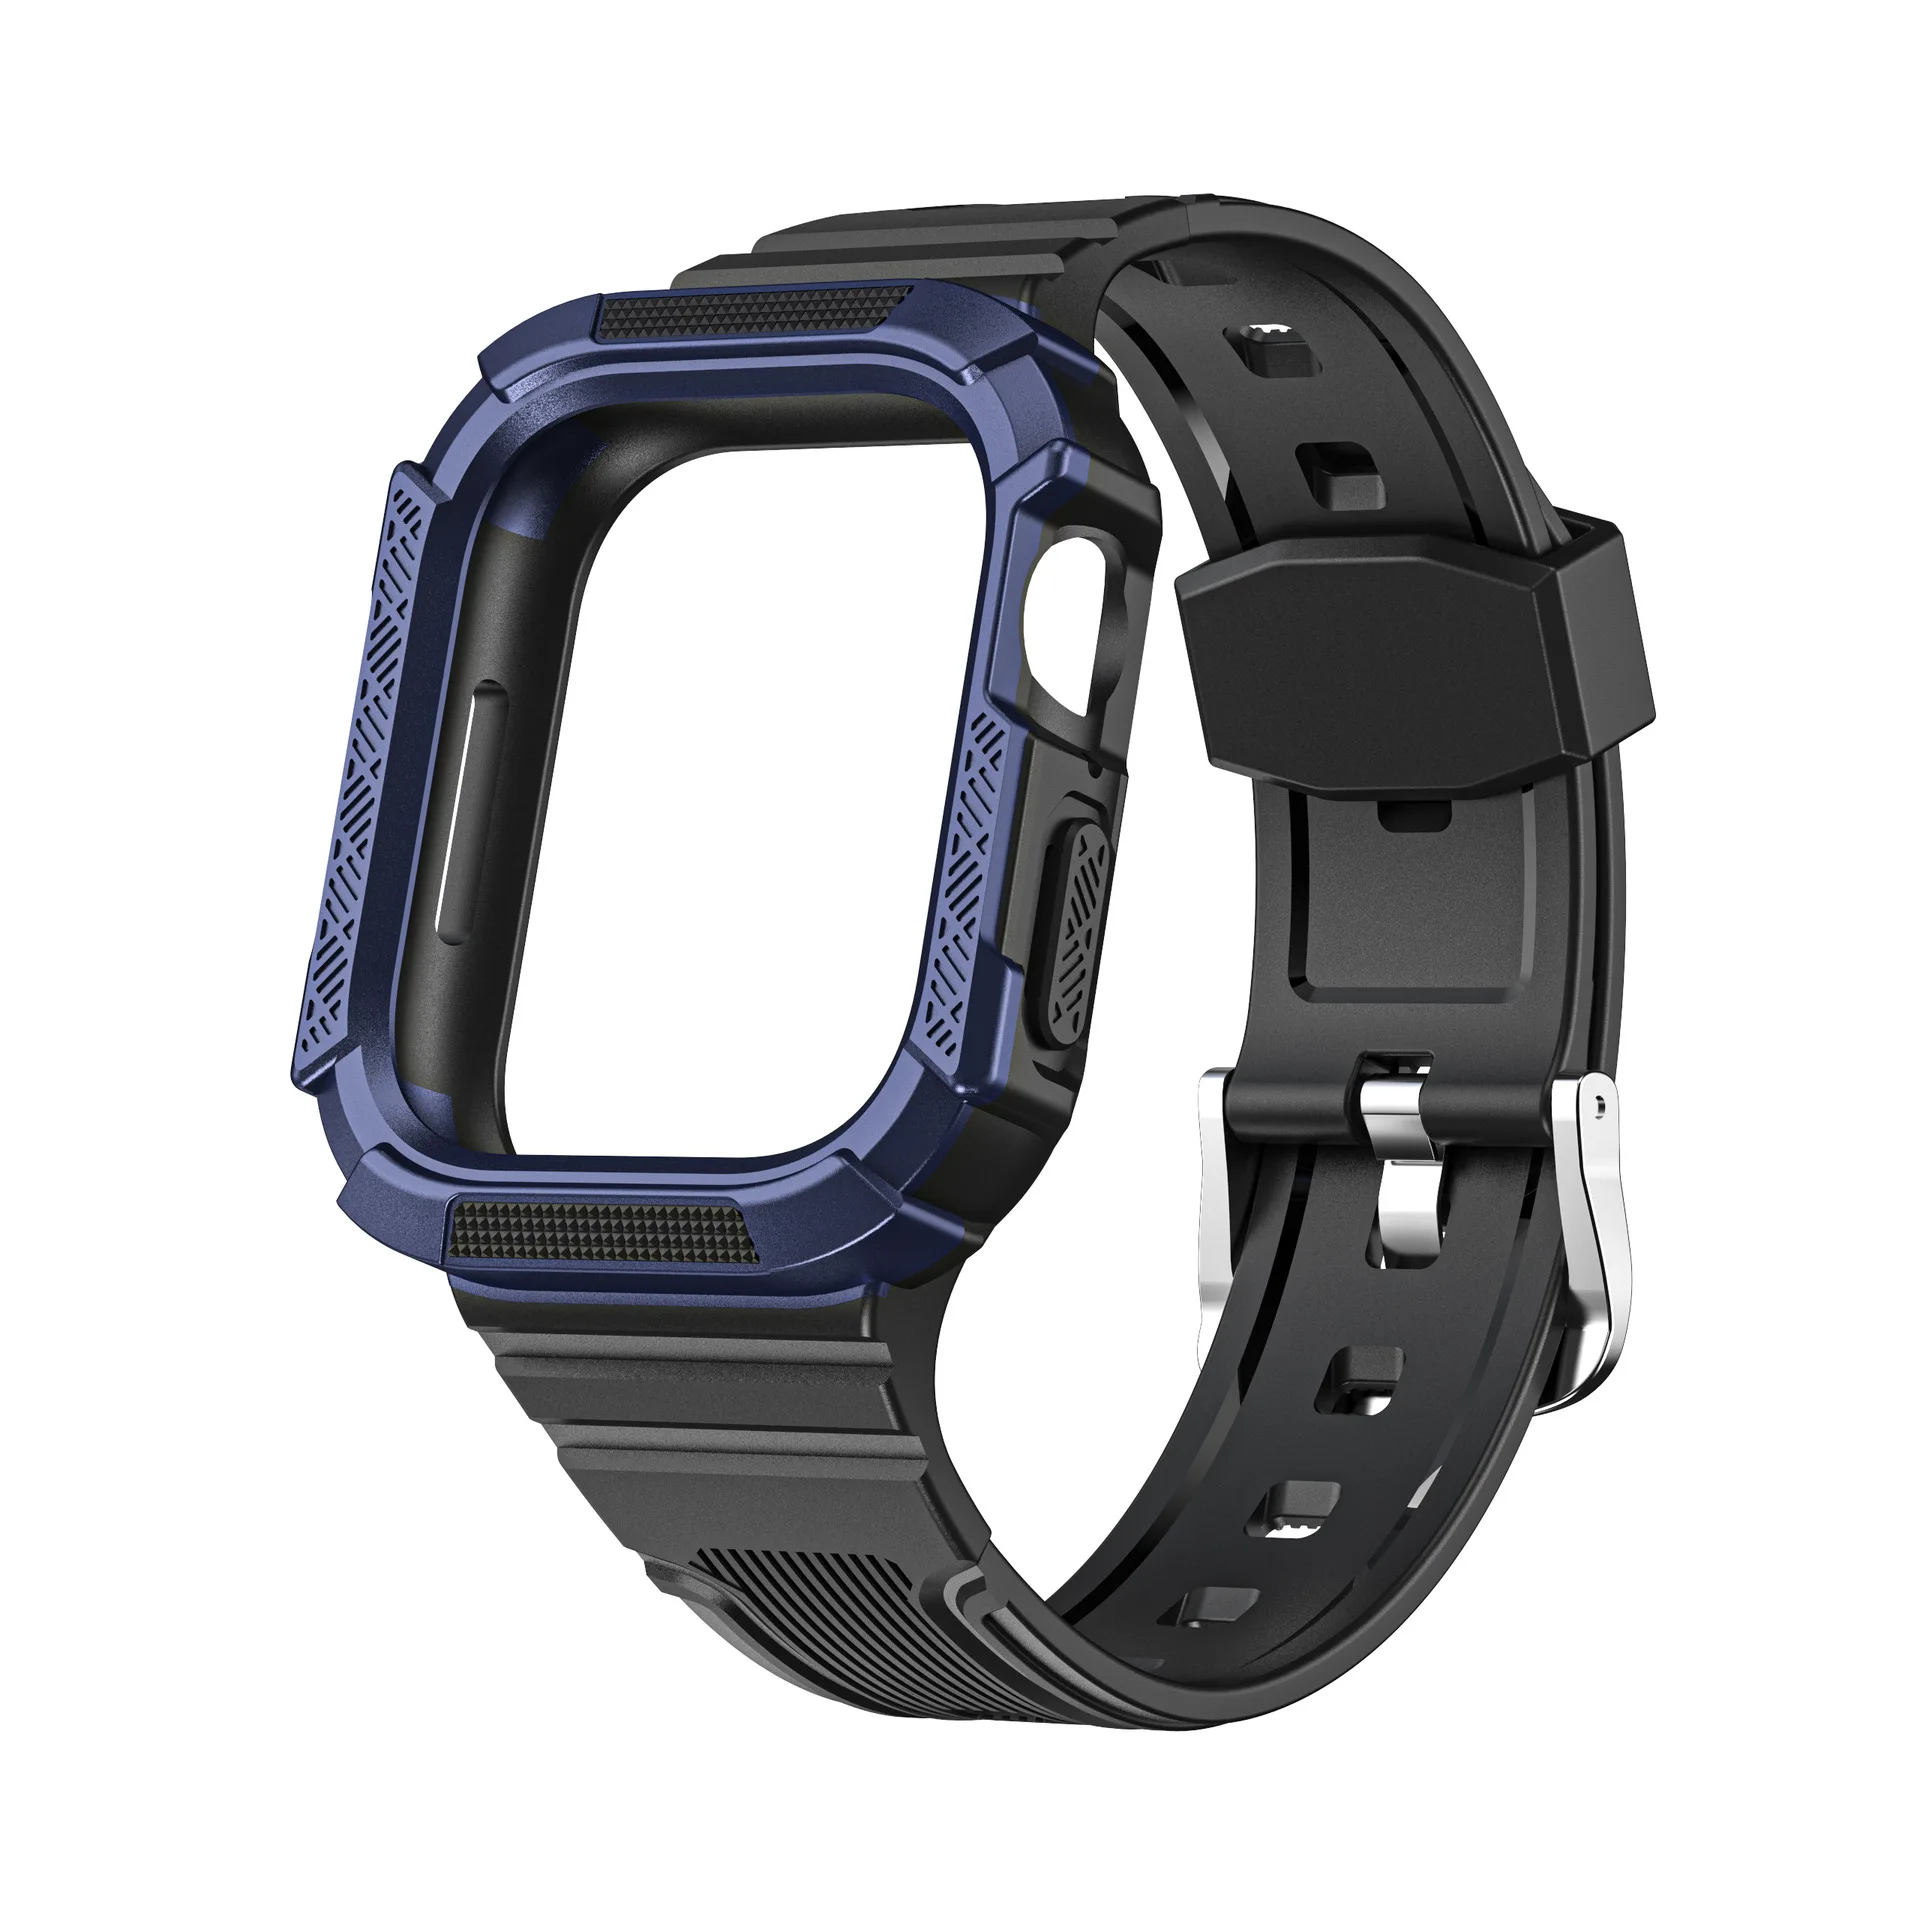 Apple watch with watch tpu integrated two-color armor strap enlarge